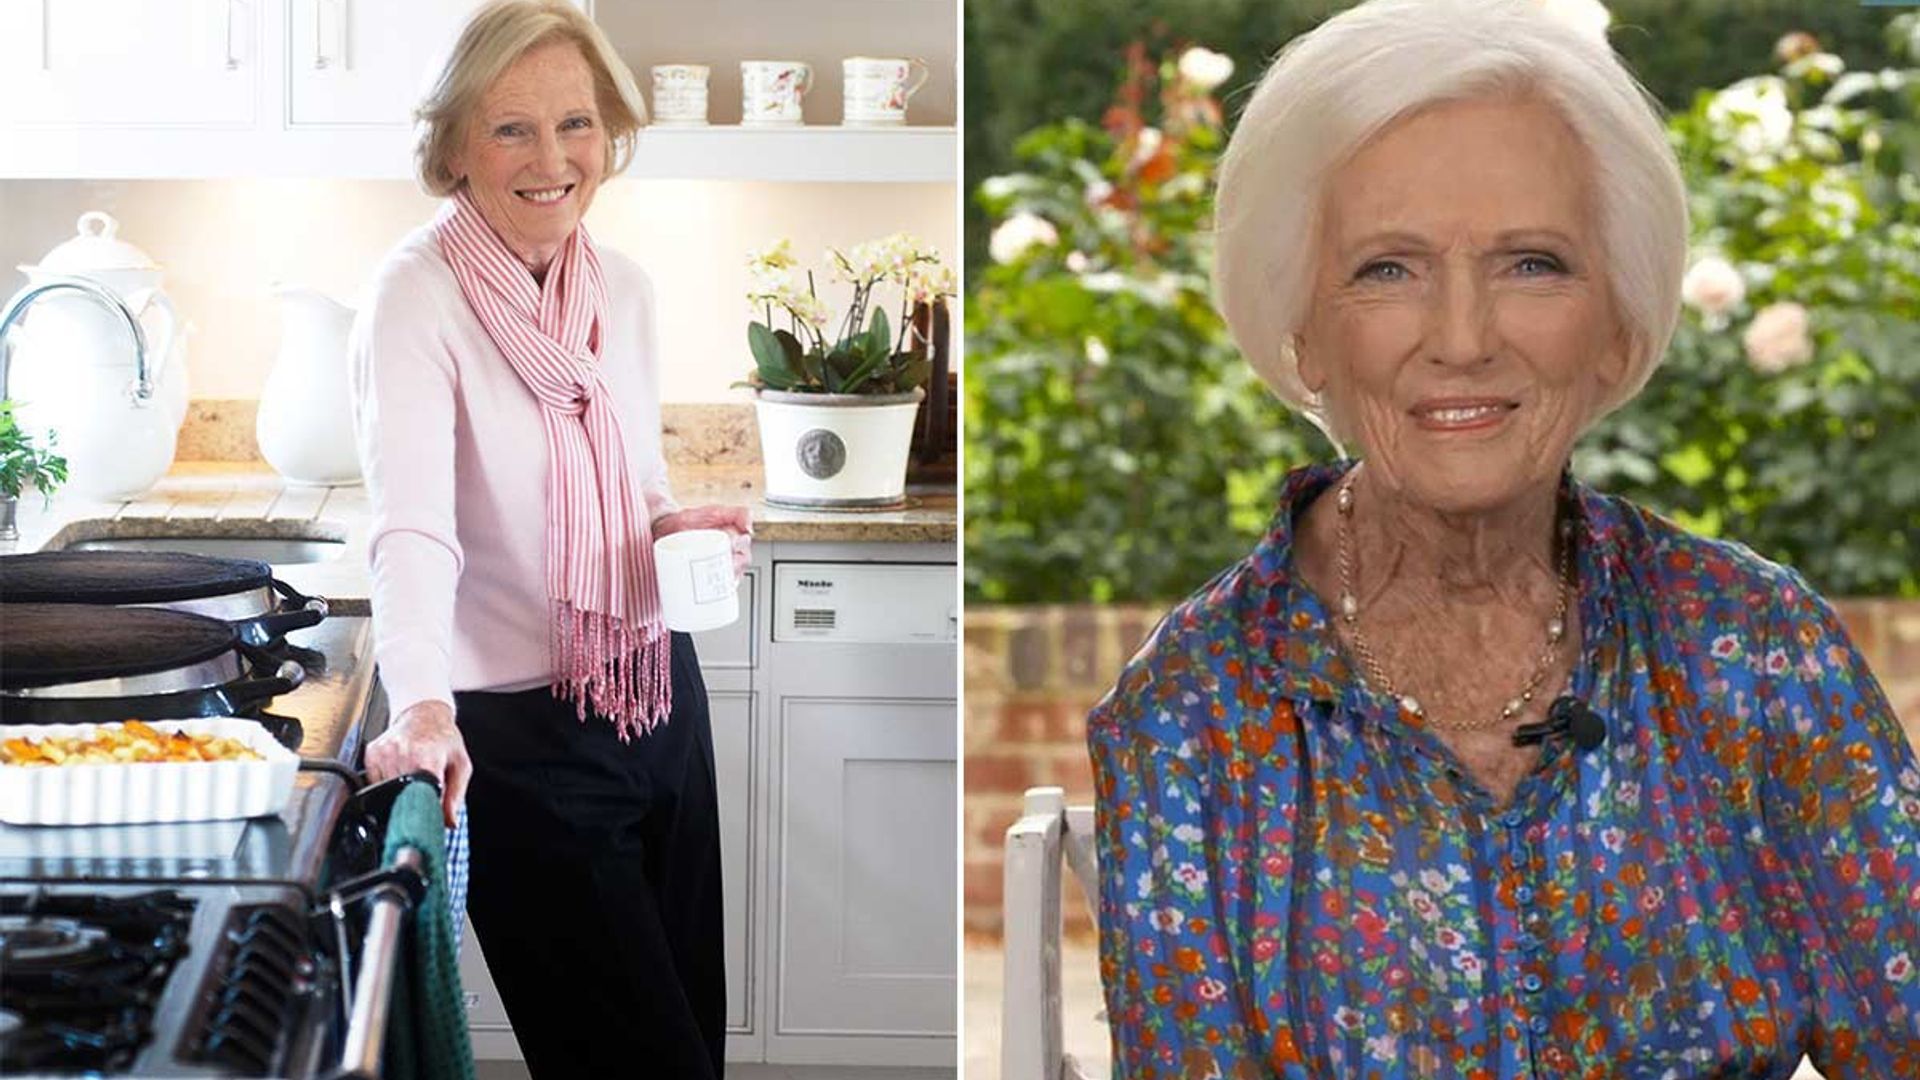 Mary Berry's £2.6million Oxfordshire home is even more beautiful than we imagined